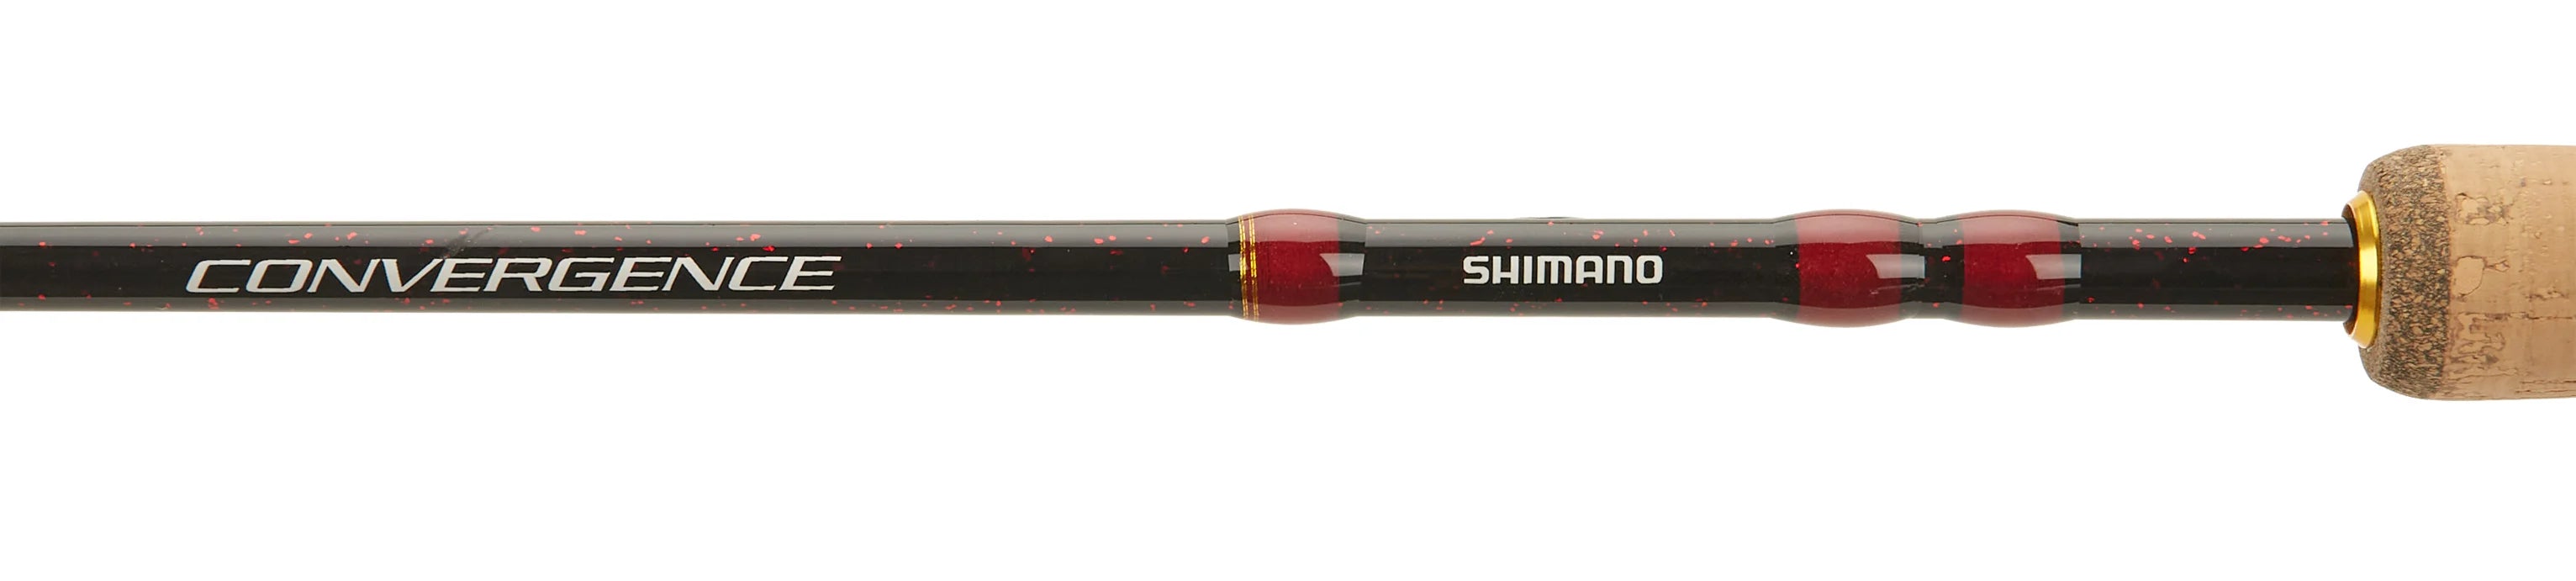 SHIMANO CONVERGENCE D 2-PIECE CASTING RODS